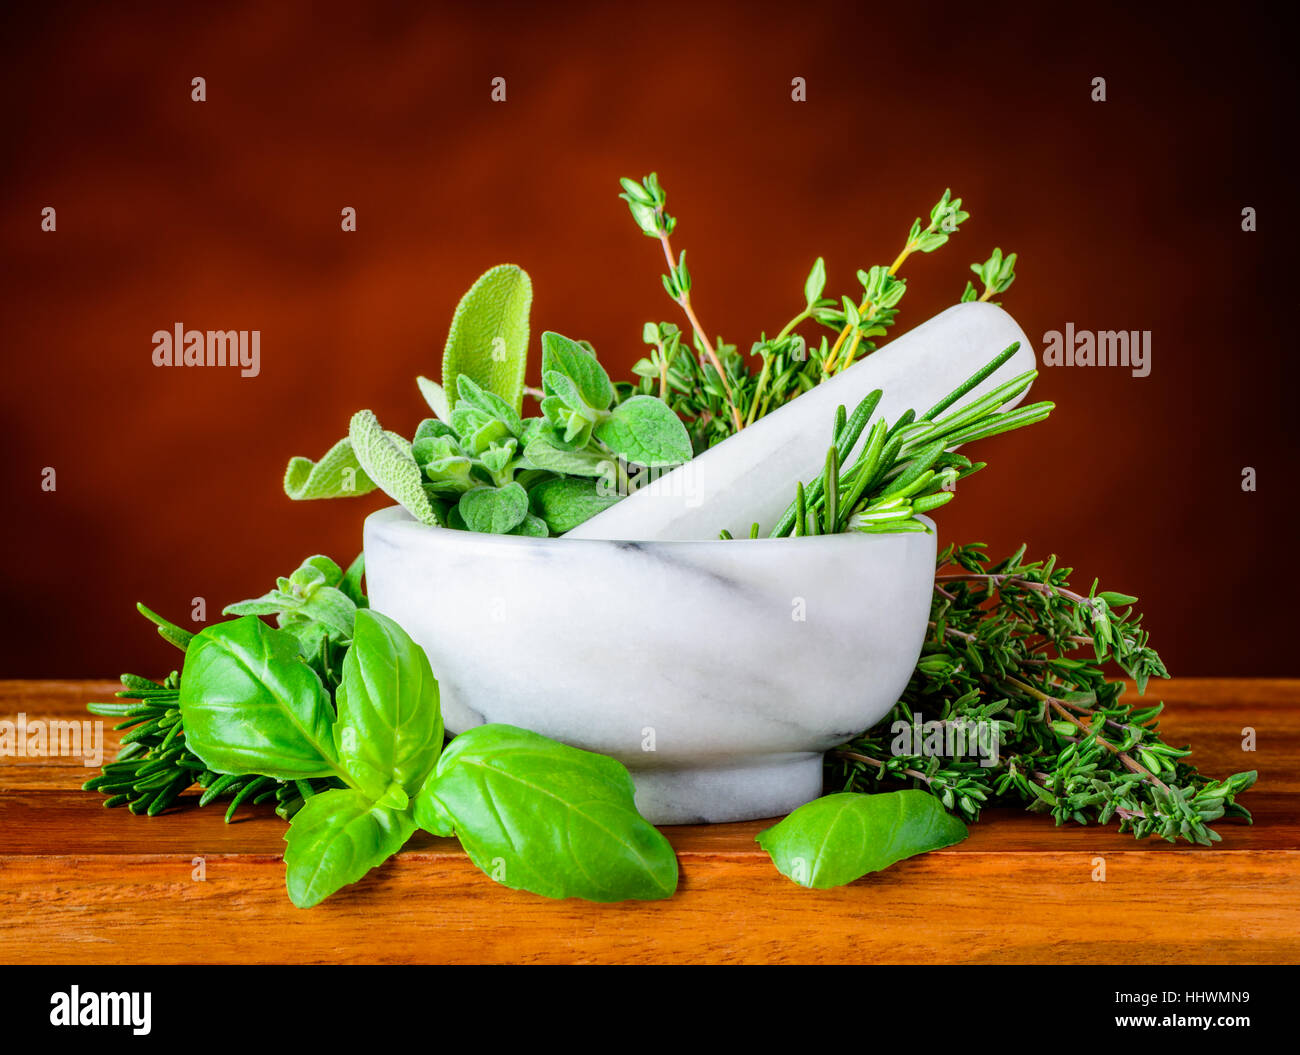 White pestle and mortar with different green herbs, basil, mint rosemary Stock Photo